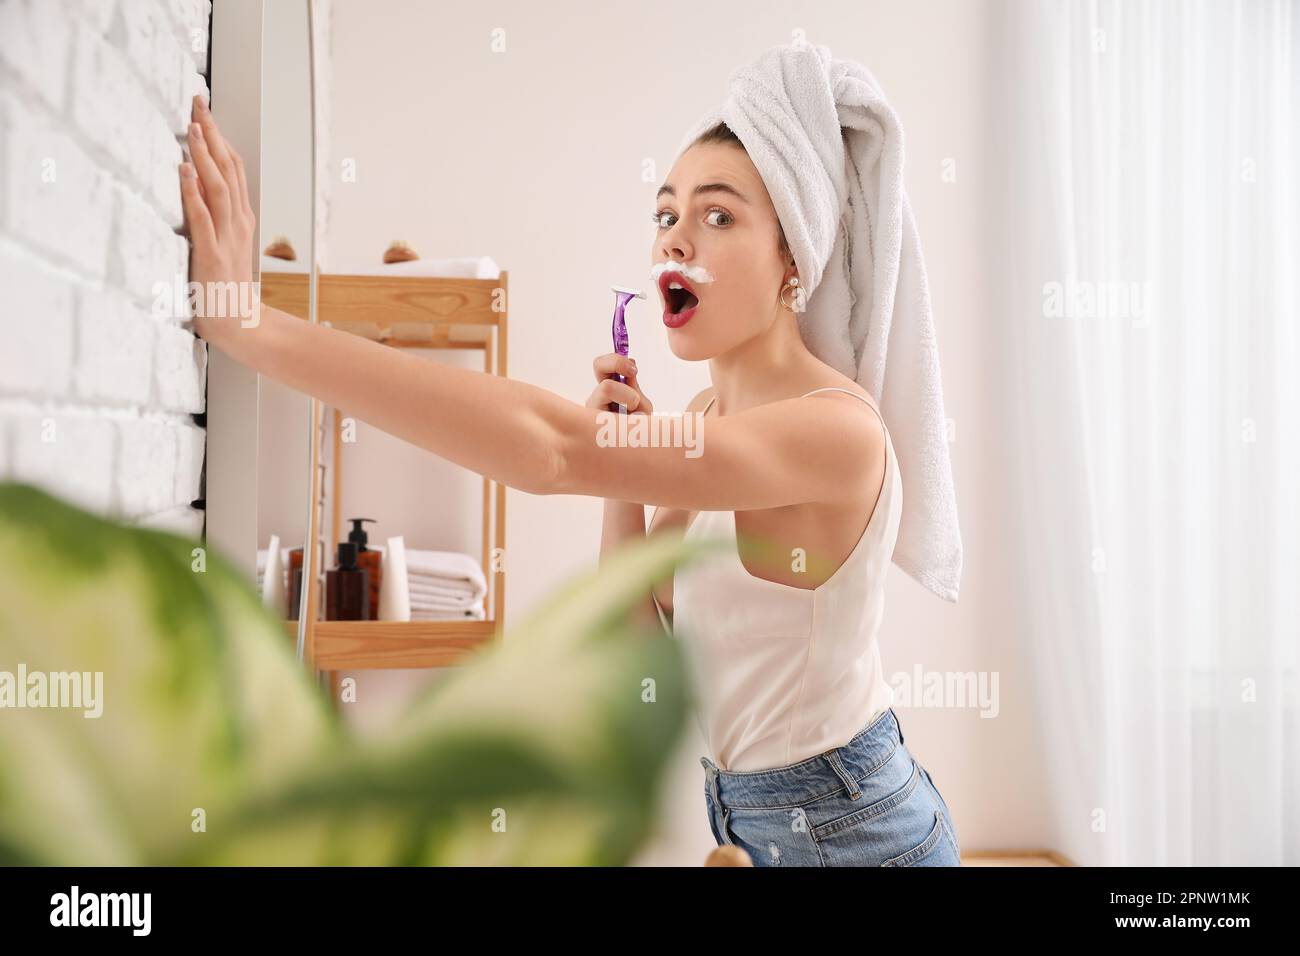 Young woman shaving face with razor near mirror in bathroom Stock Photo